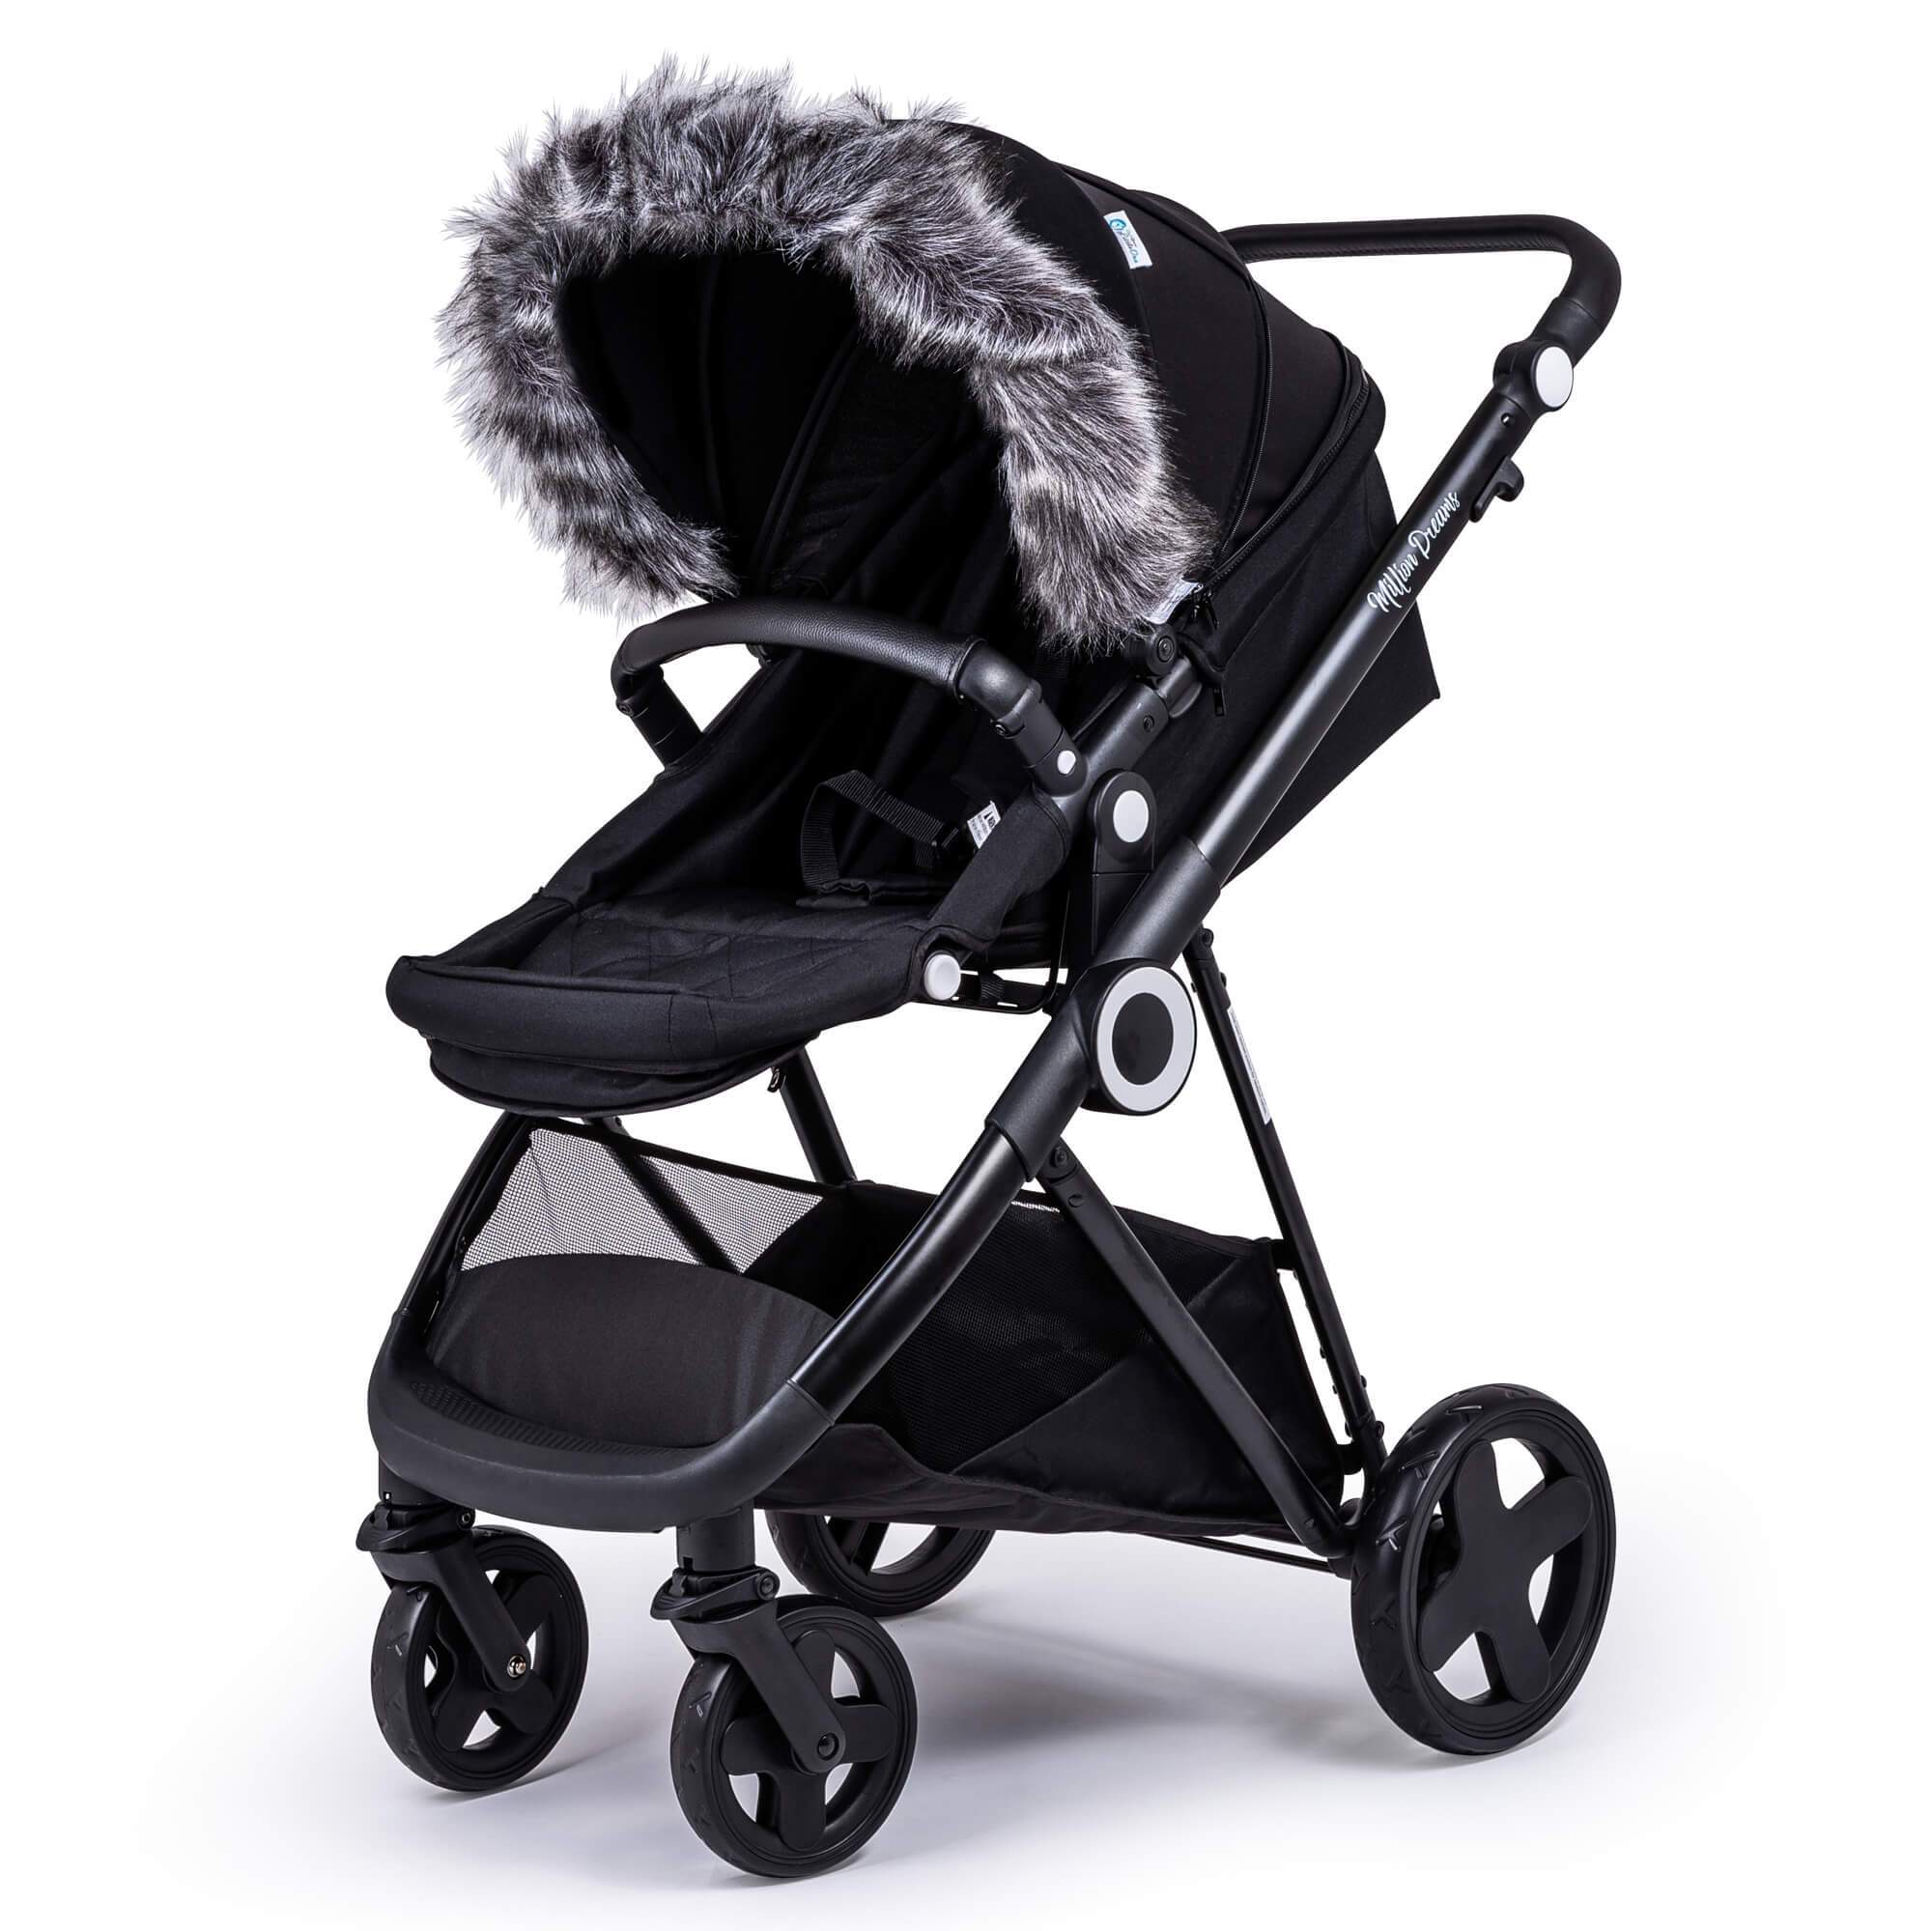 Pram Fur Hood Trim Attachment for Pushchair Compatible with Esprit - For Your Little One